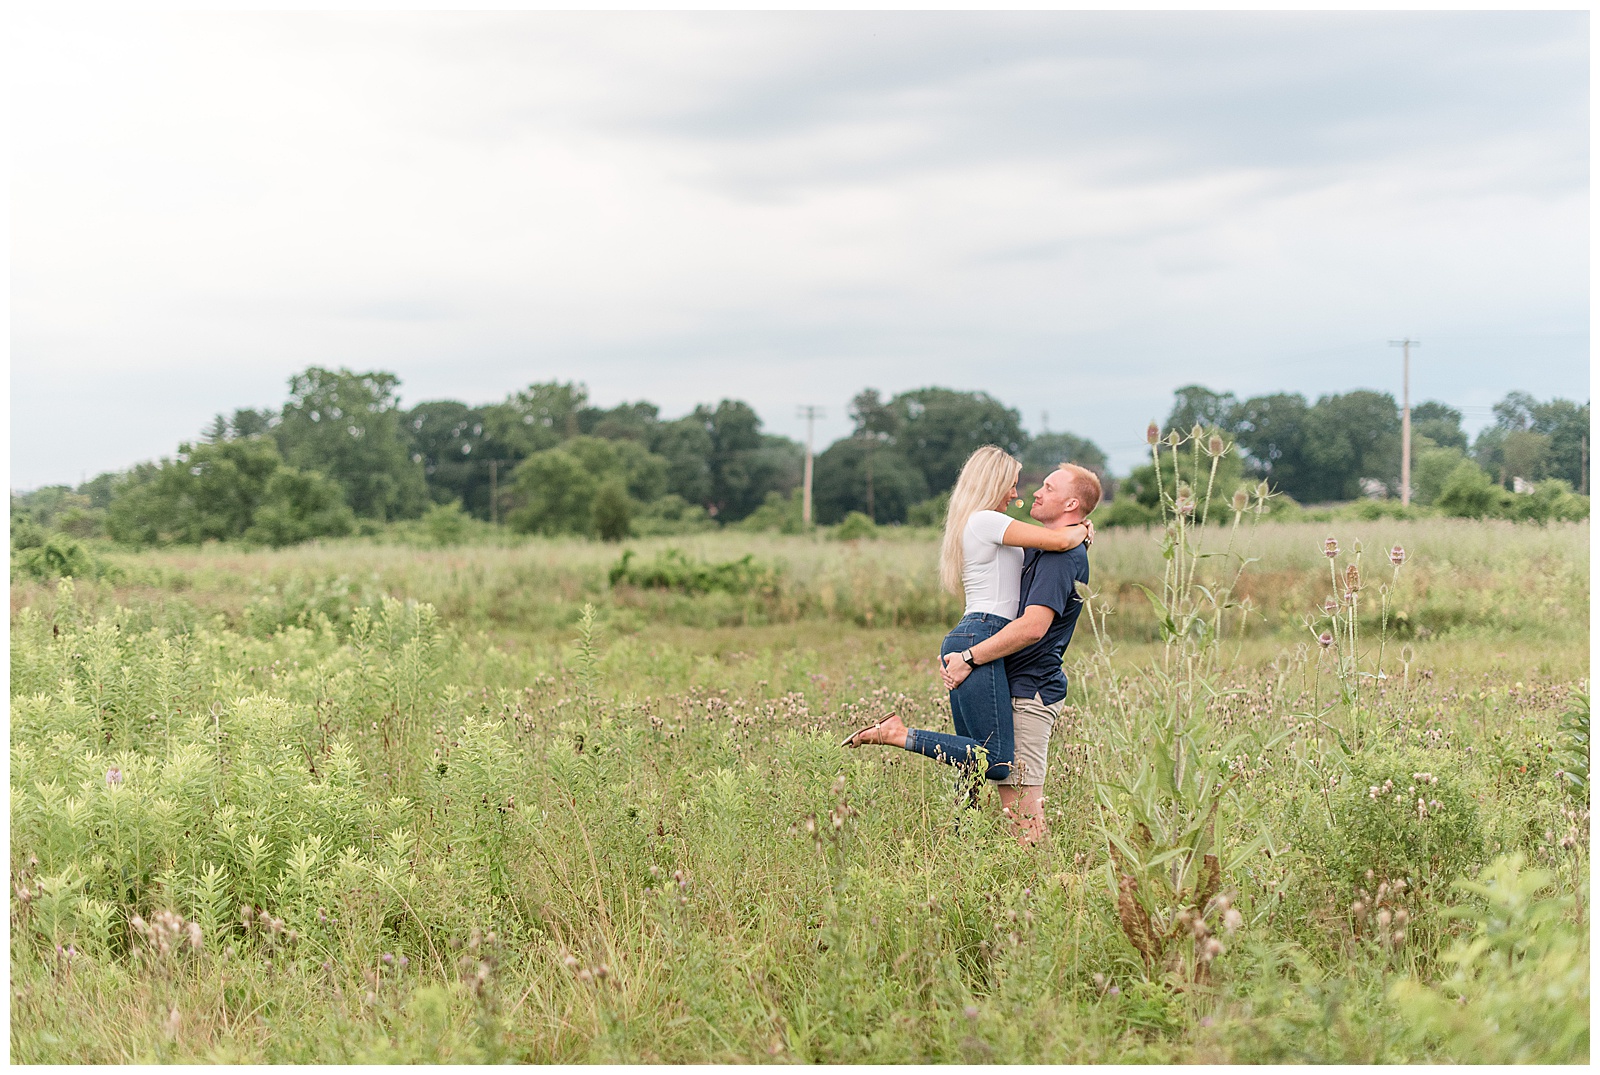 guy lifting girl in middle of tall grass field at Overlook Park, PA